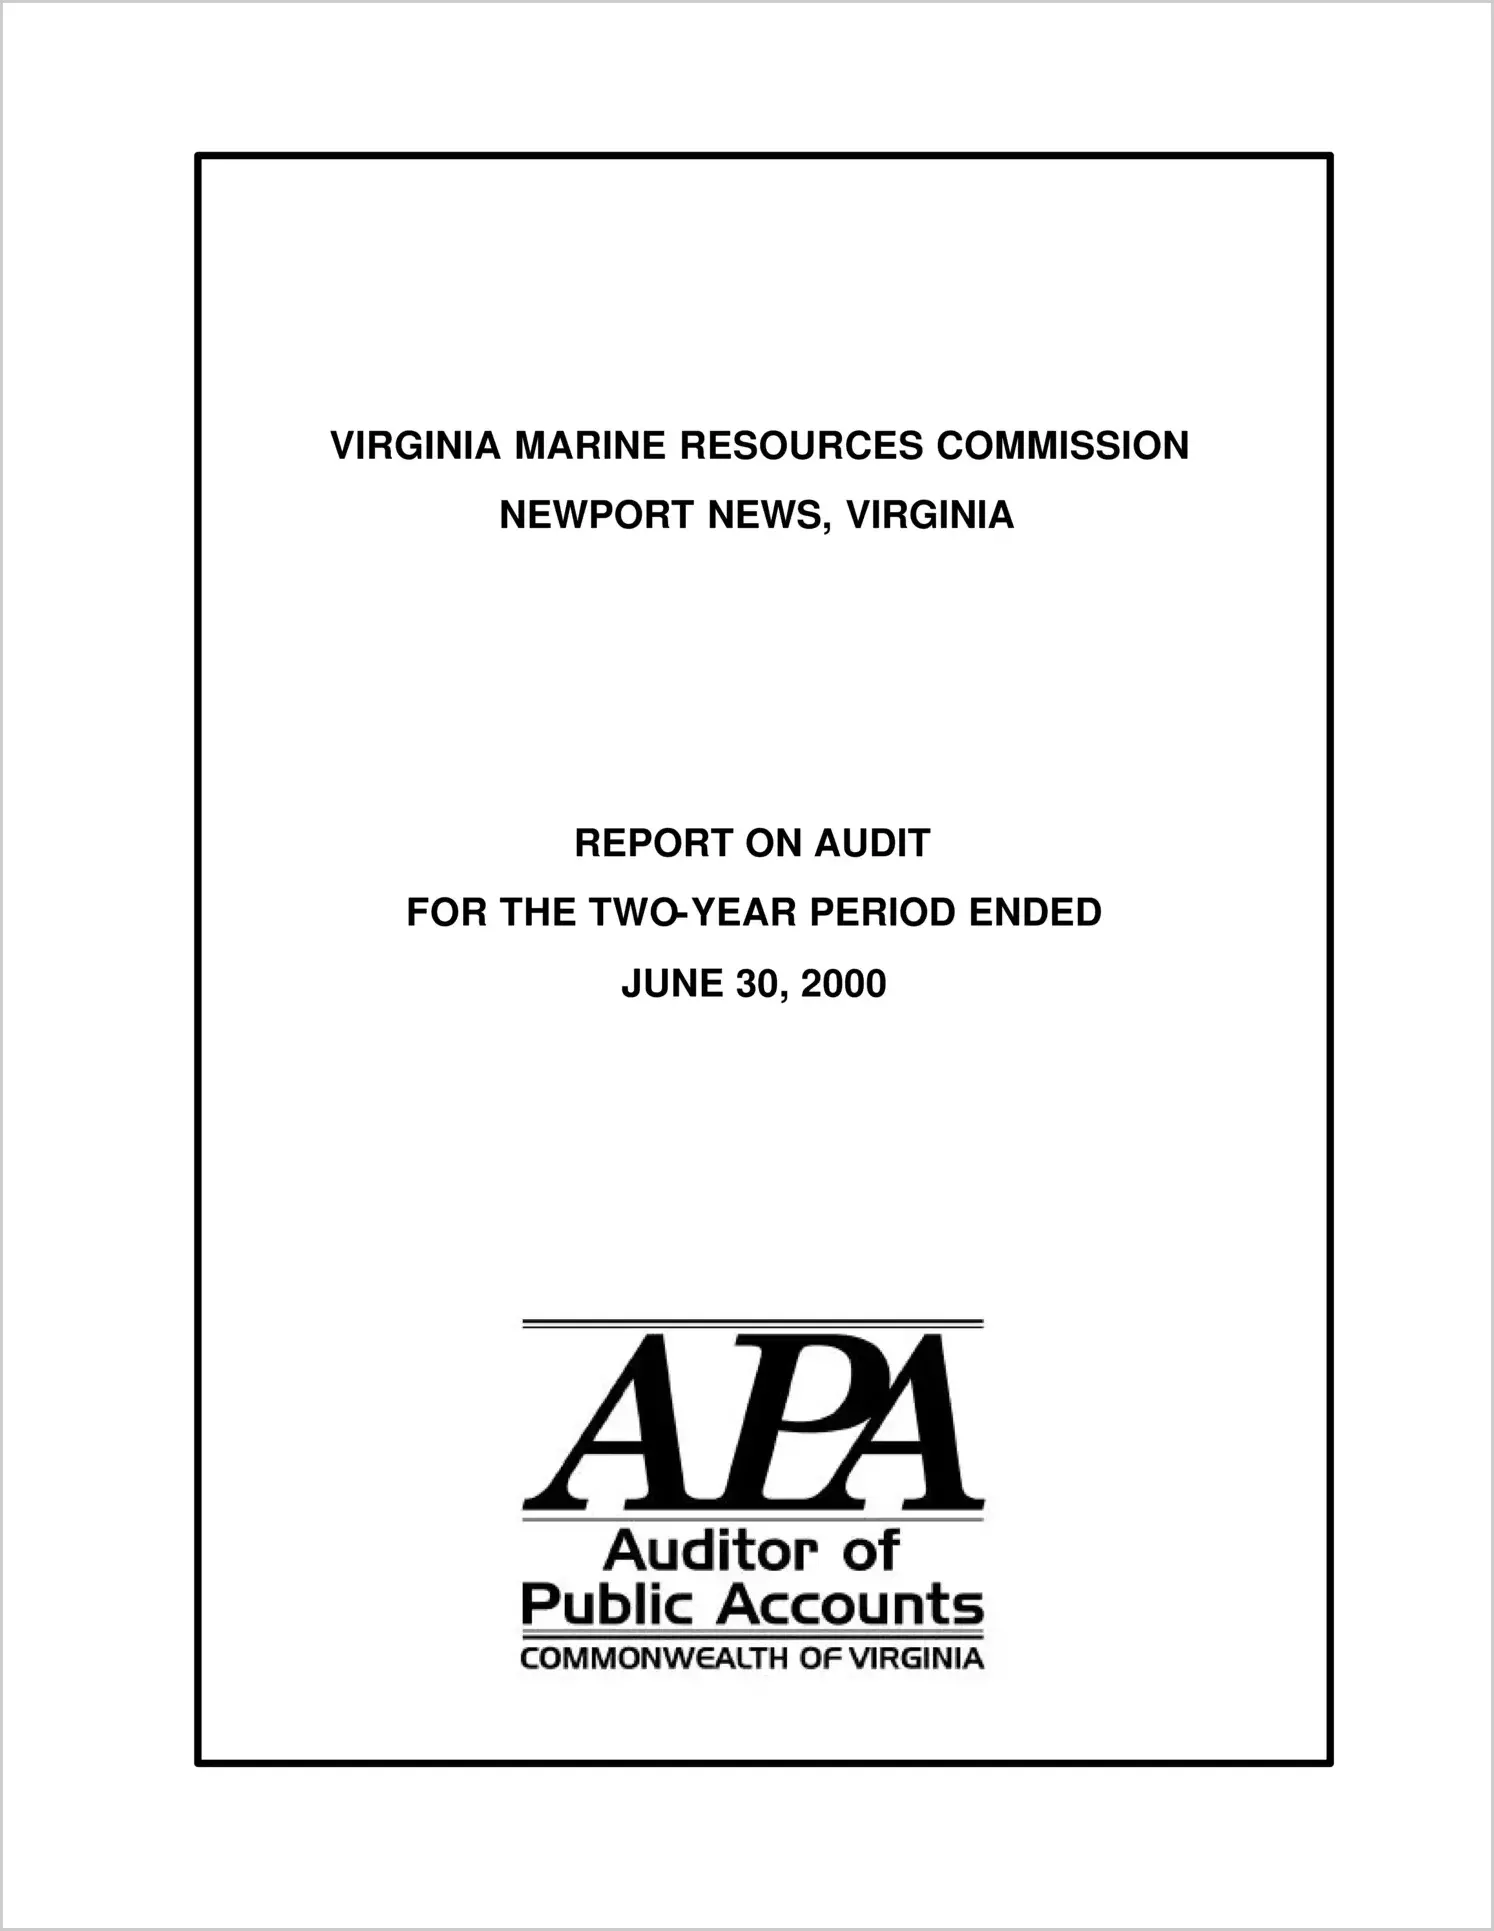 Virginia Marine Resources Commission for the two-year period ended June 30, 2000